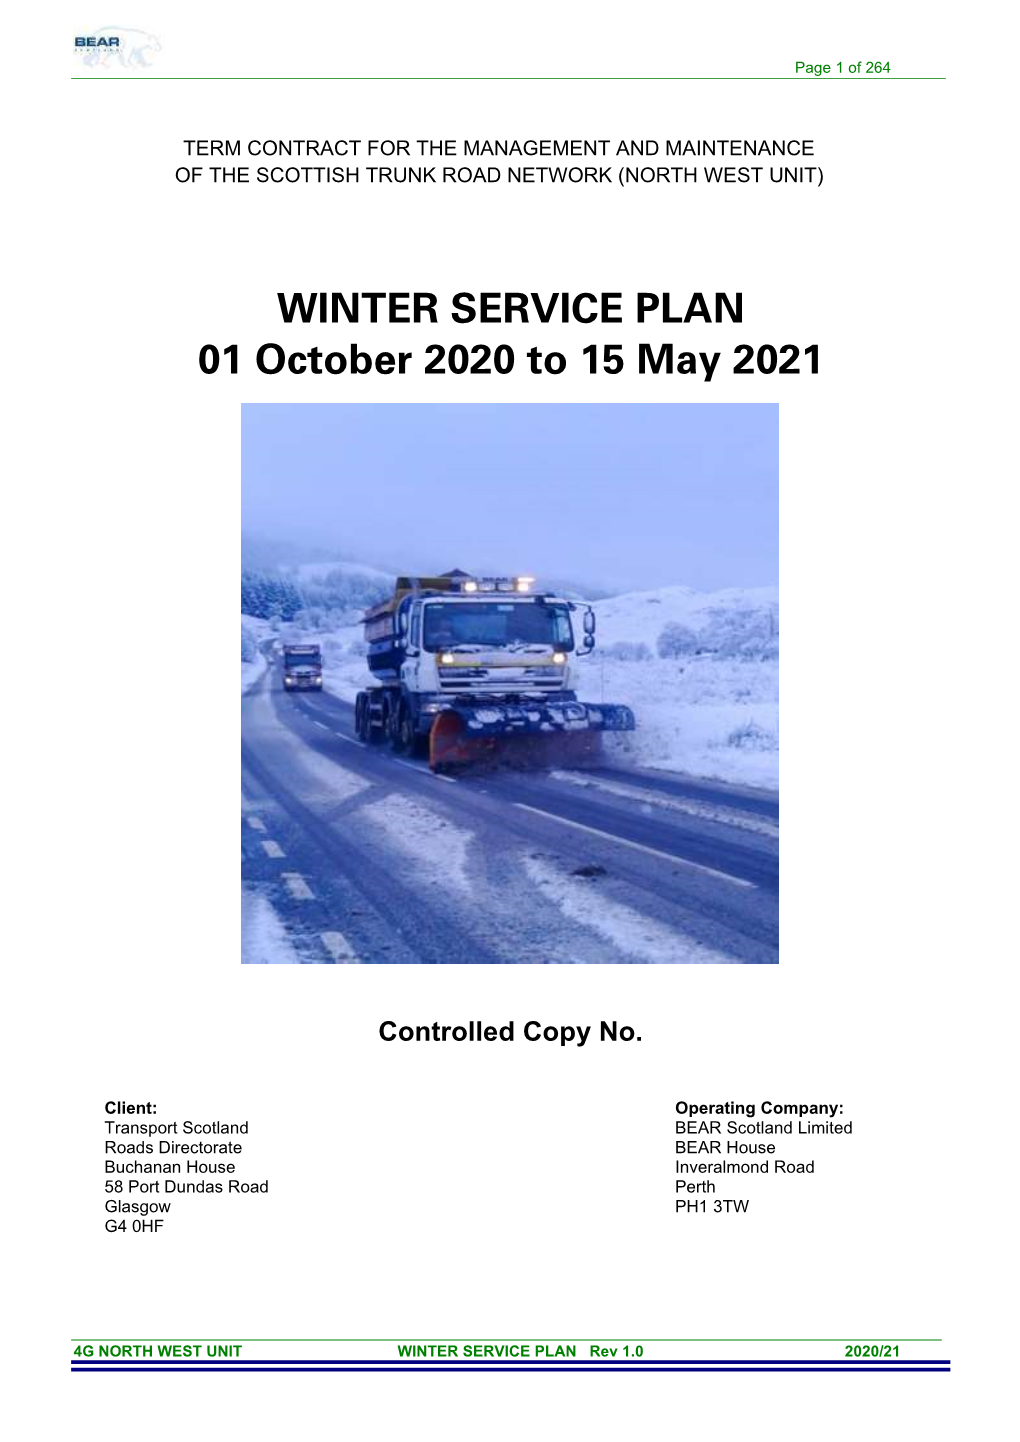 WINTER SERVICE PLAN 01 October 2020 to 15 May 2021